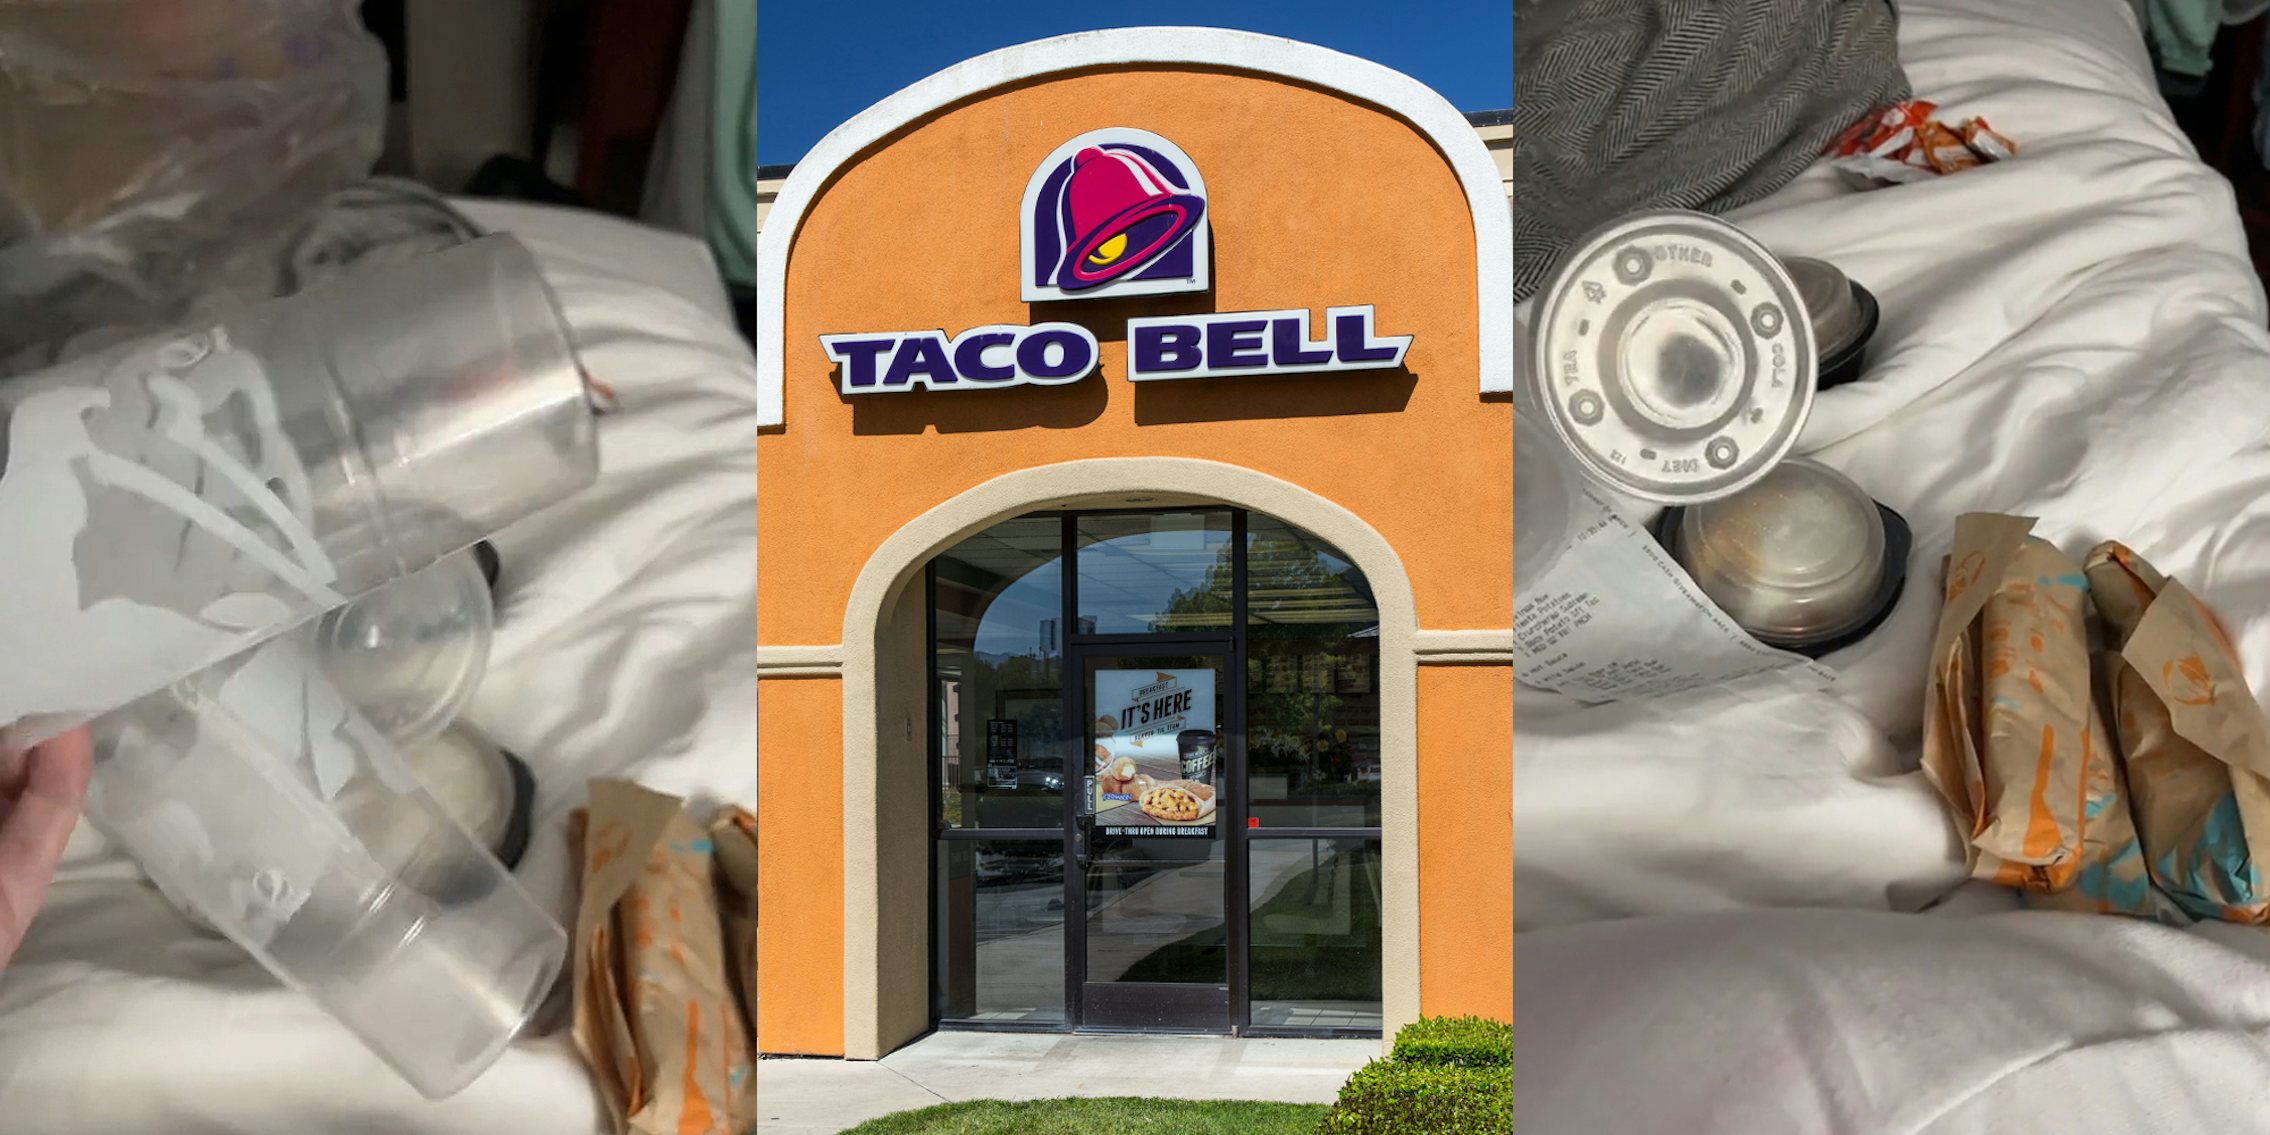 empty Taco Bell cups in hand next to food on bed (l) Taco Bell building with sign (c) Taco Bell DoorDash delivery on bed (r)